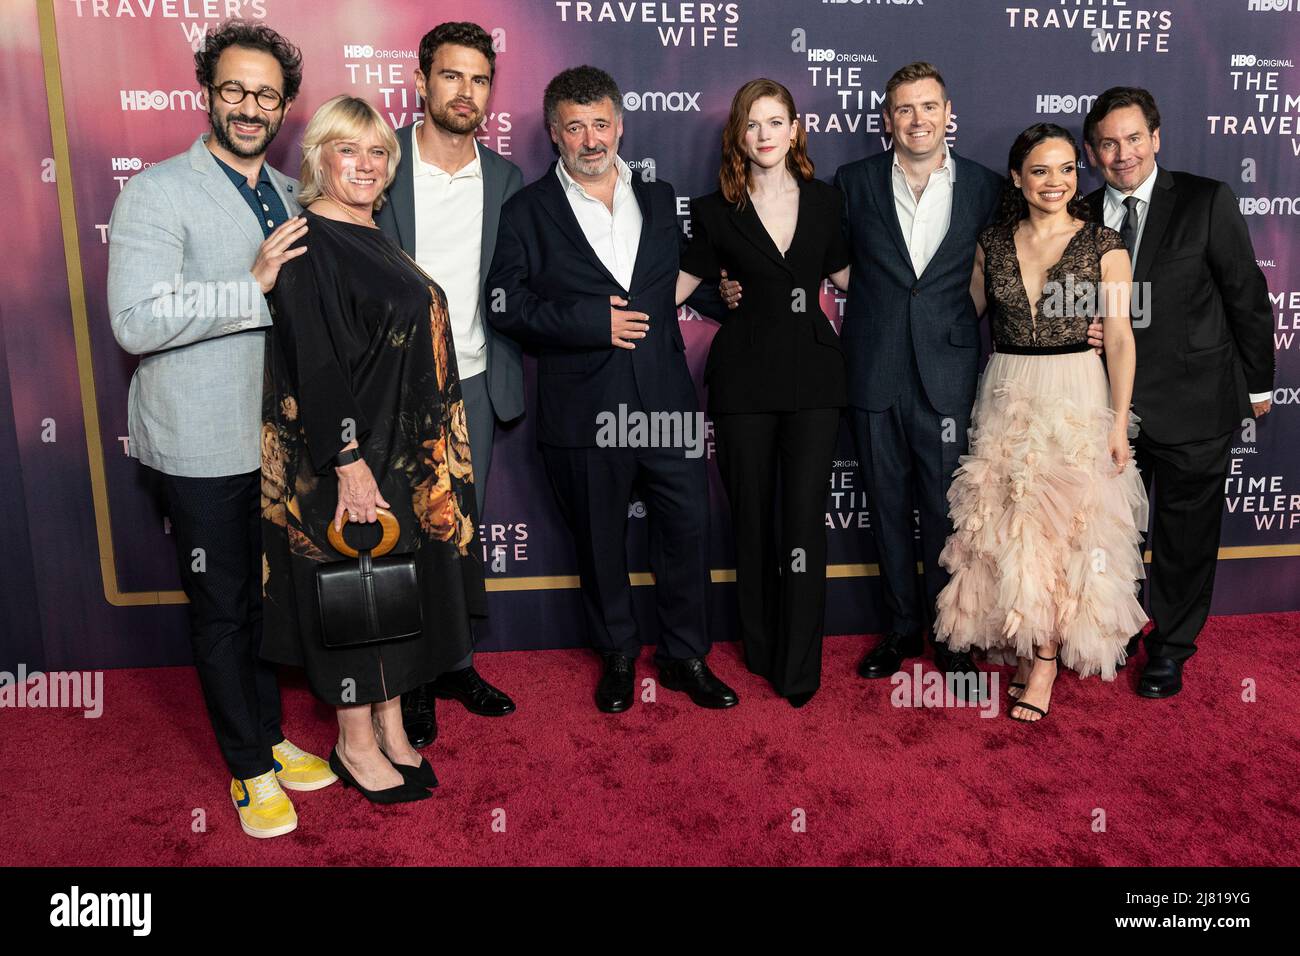 New York, USA. 11th May, 2022. Desmin Borges, Sue Vertue, Theo James, Steven Moffat, Rose Leslie, Brian Minchin, Natasha Lopez, David Nutter attend HBO's The Time Traveler's Wife premiere at Morgan Library in New York on May 11, 2022. (Photo by Lev Radin/Sipa USA) Credit: Sipa USA/Alamy Live News Stock Photo